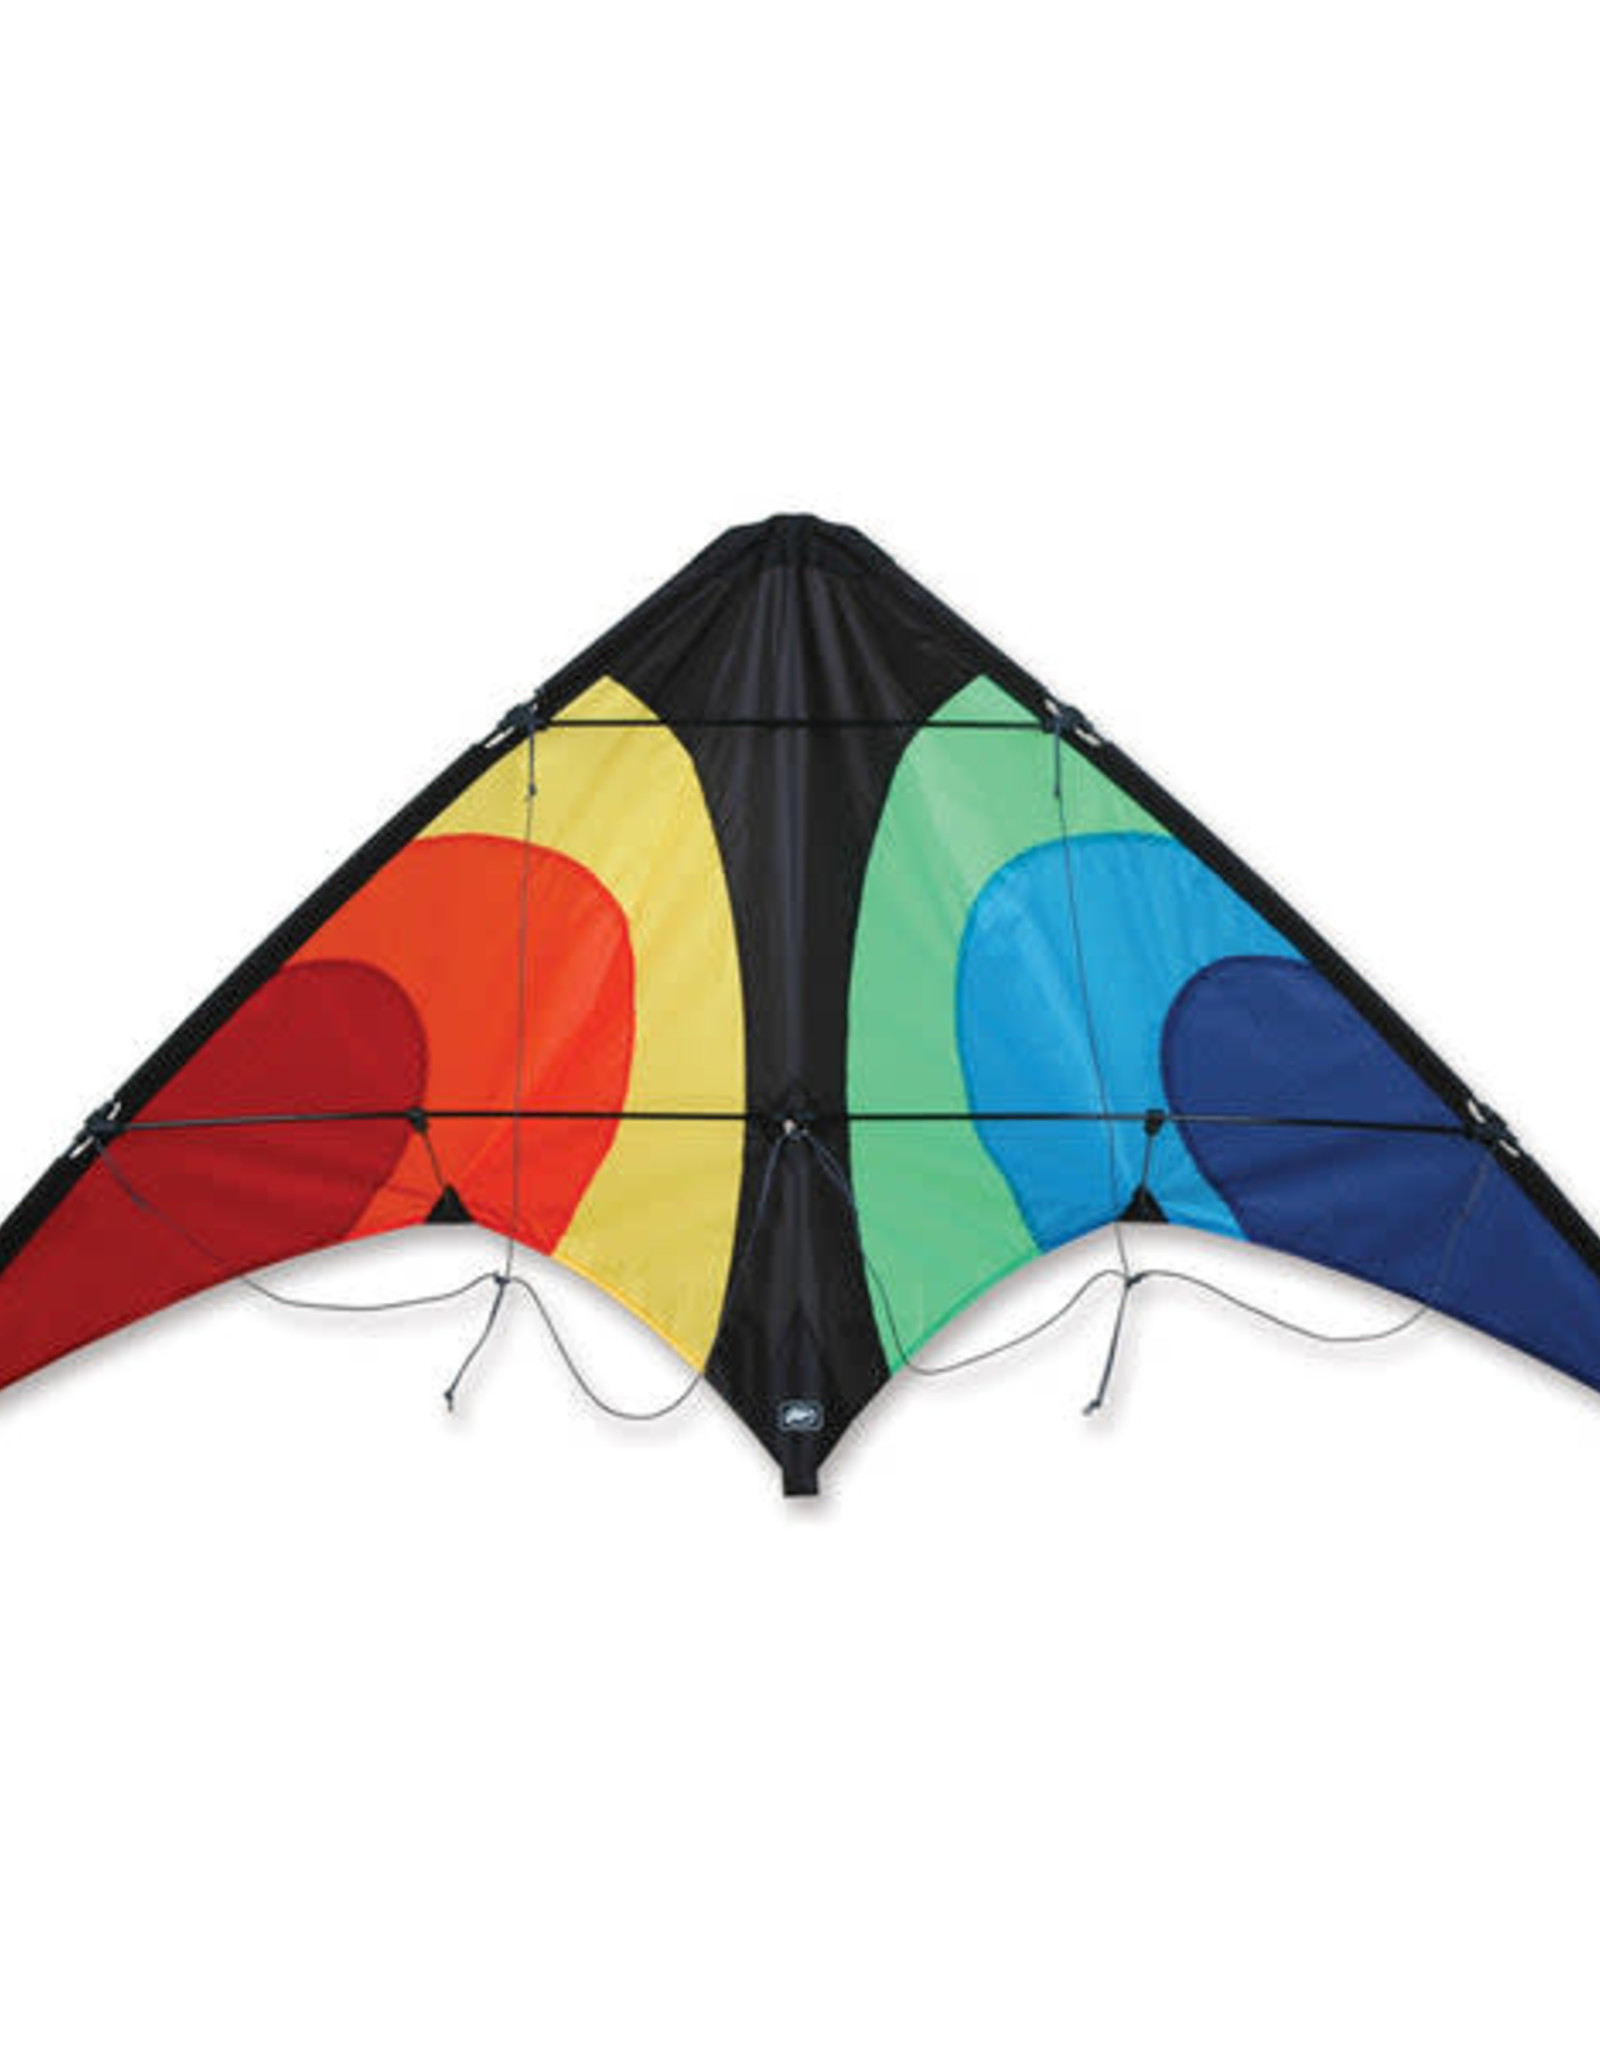 Premier Kites LIGHTNING - RAINBOW *Not available for shipping. Pick up only.